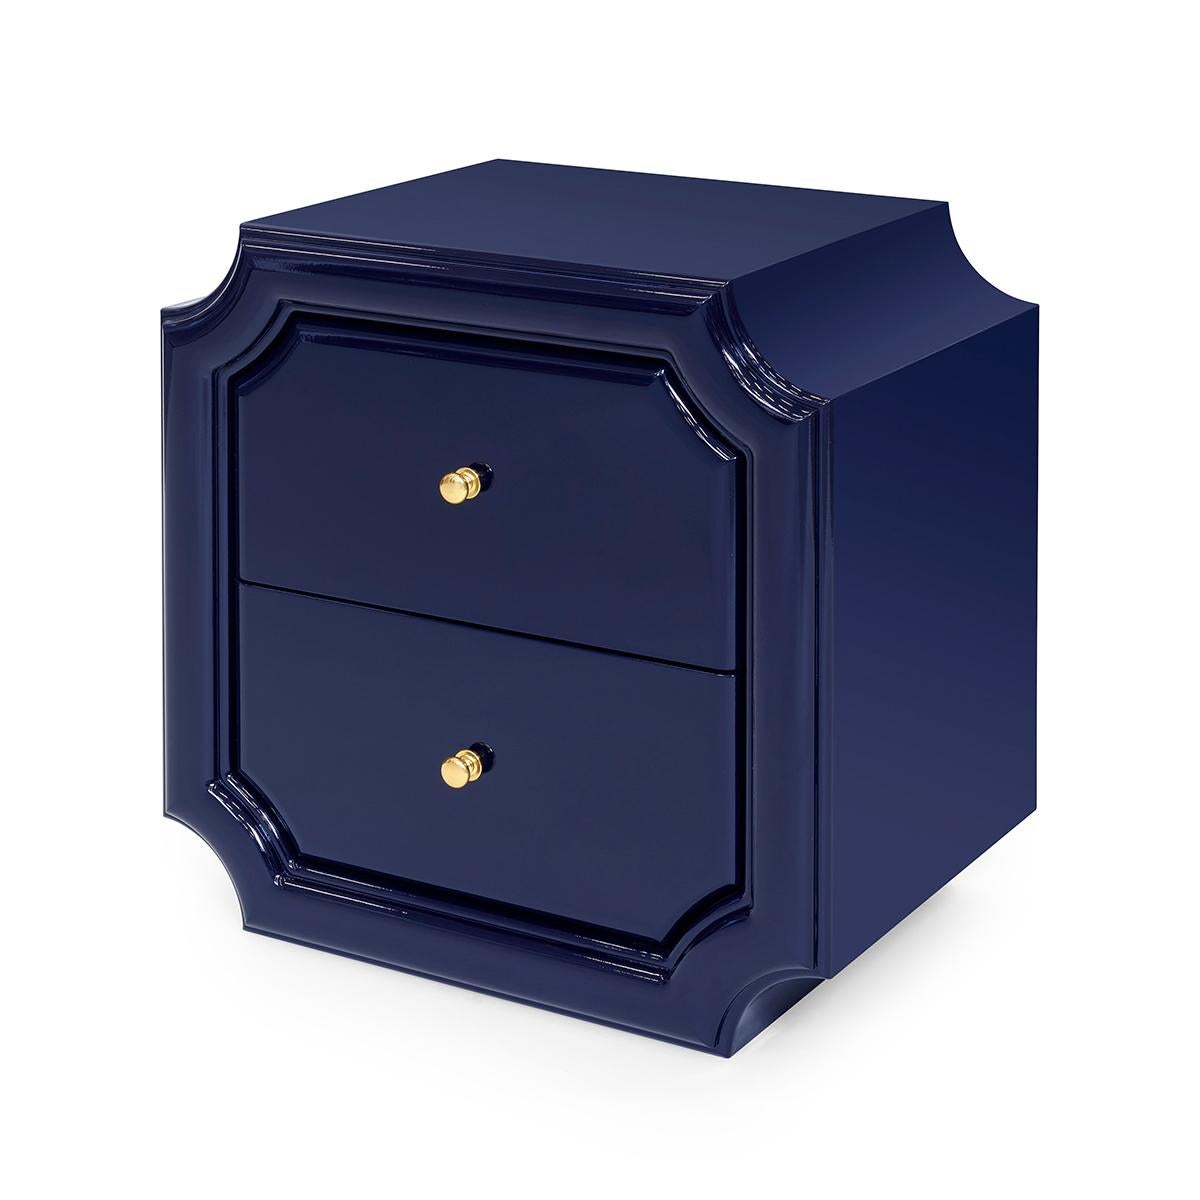 Side table Timeo blue in solid wood
in blue lacquered finish. With 2 drawers
with easy glide system on metal runners,
with brass button handles.